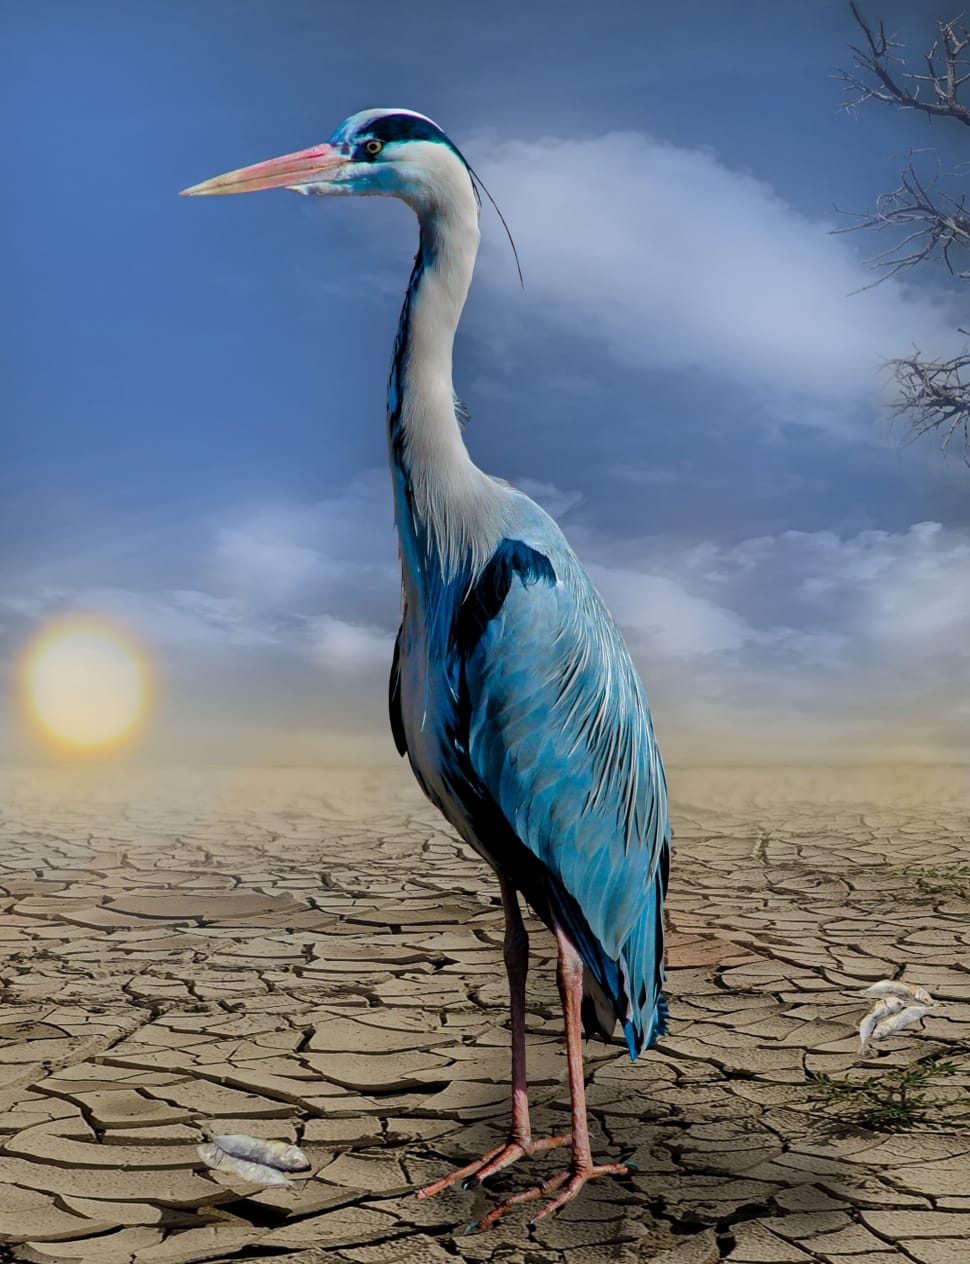 white and blue long neck bird standing in soil during dry season preview